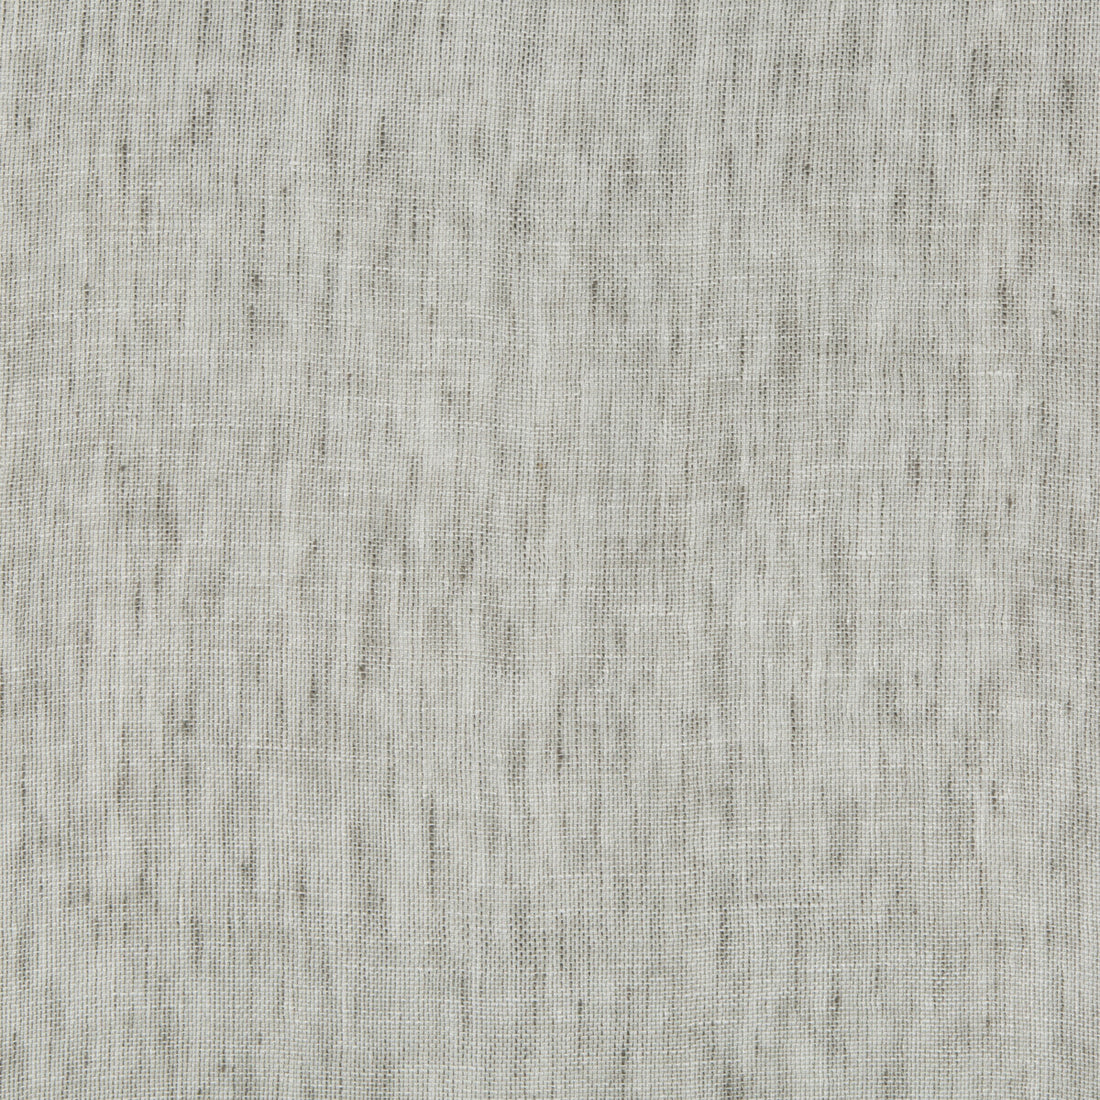 Lunada fabric in silver color - pattern 4548.11.0 - by Kravet Basics in the Jeffrey Alan Marks Oceanview collection